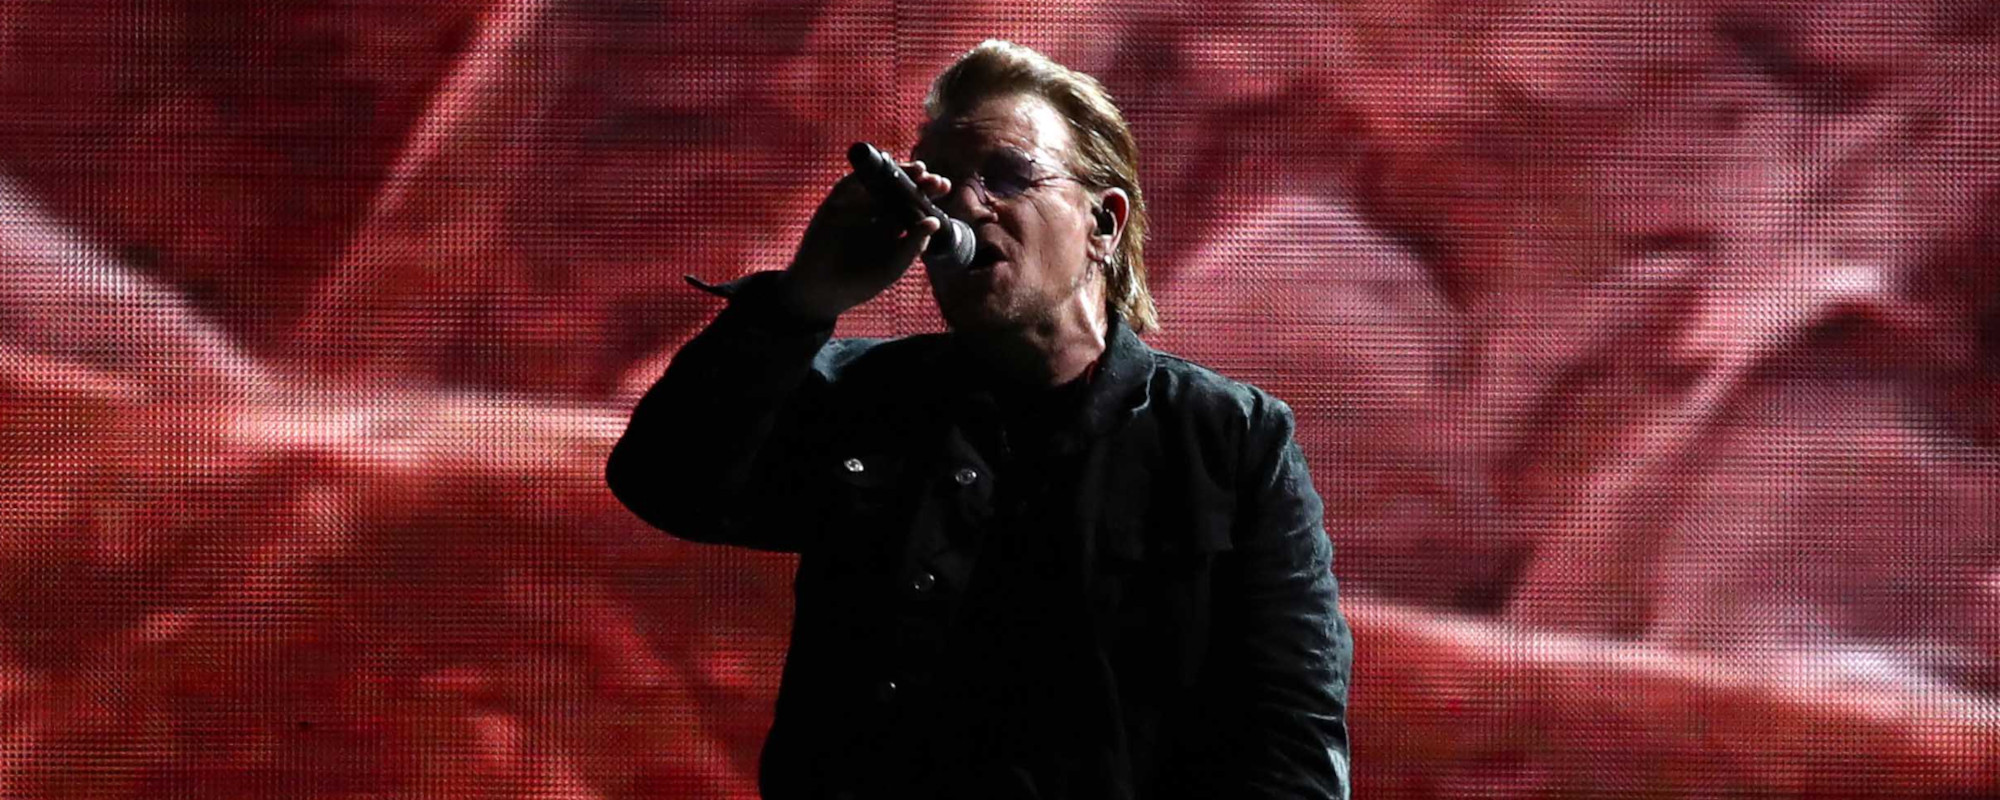 Watch: Bono Performs New Version of “With or Without You” on ‘Colbert’